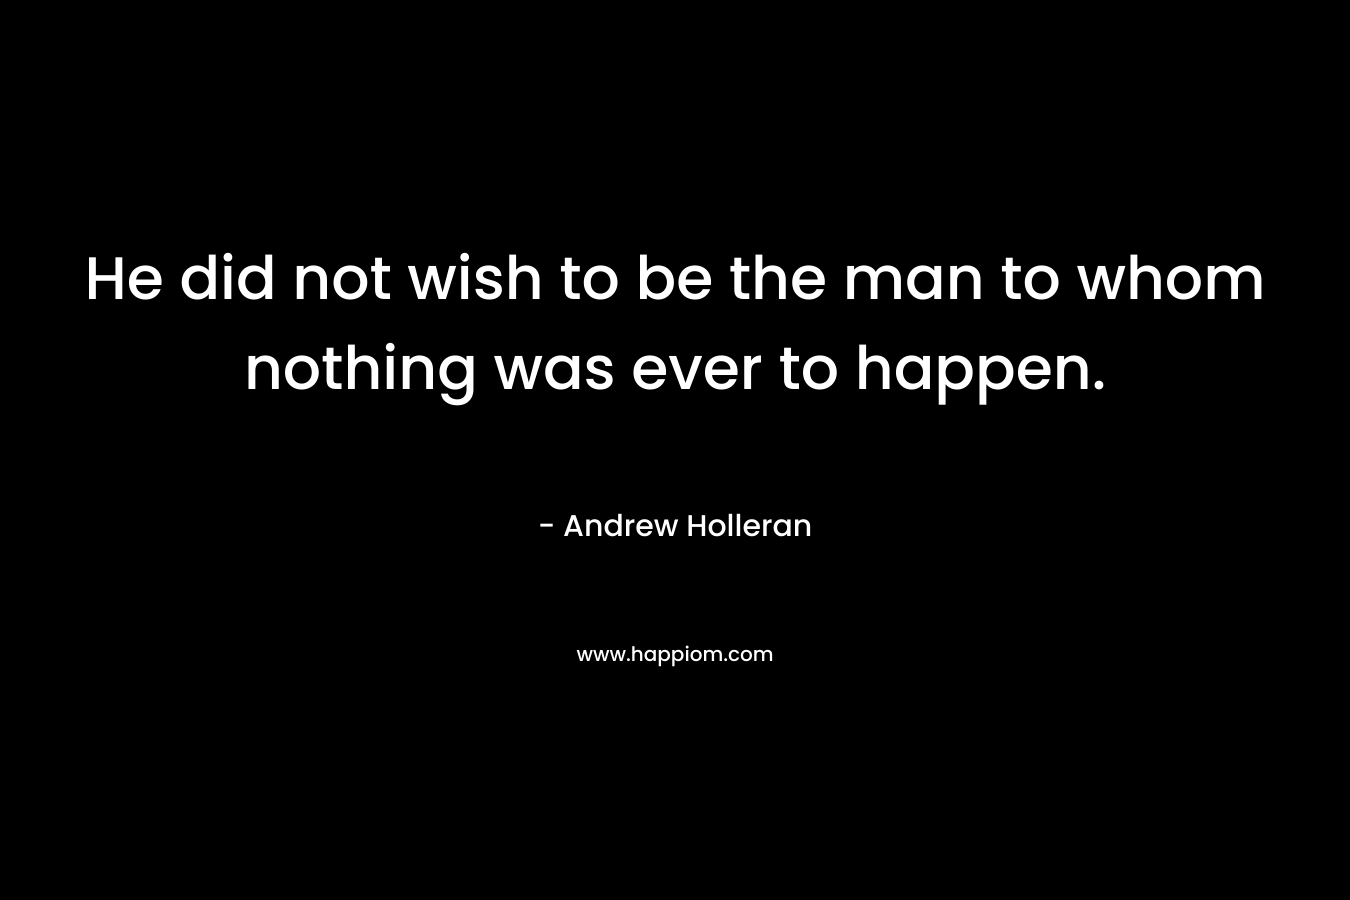 He did not wish to be the man to whom nothing was ever to happen.